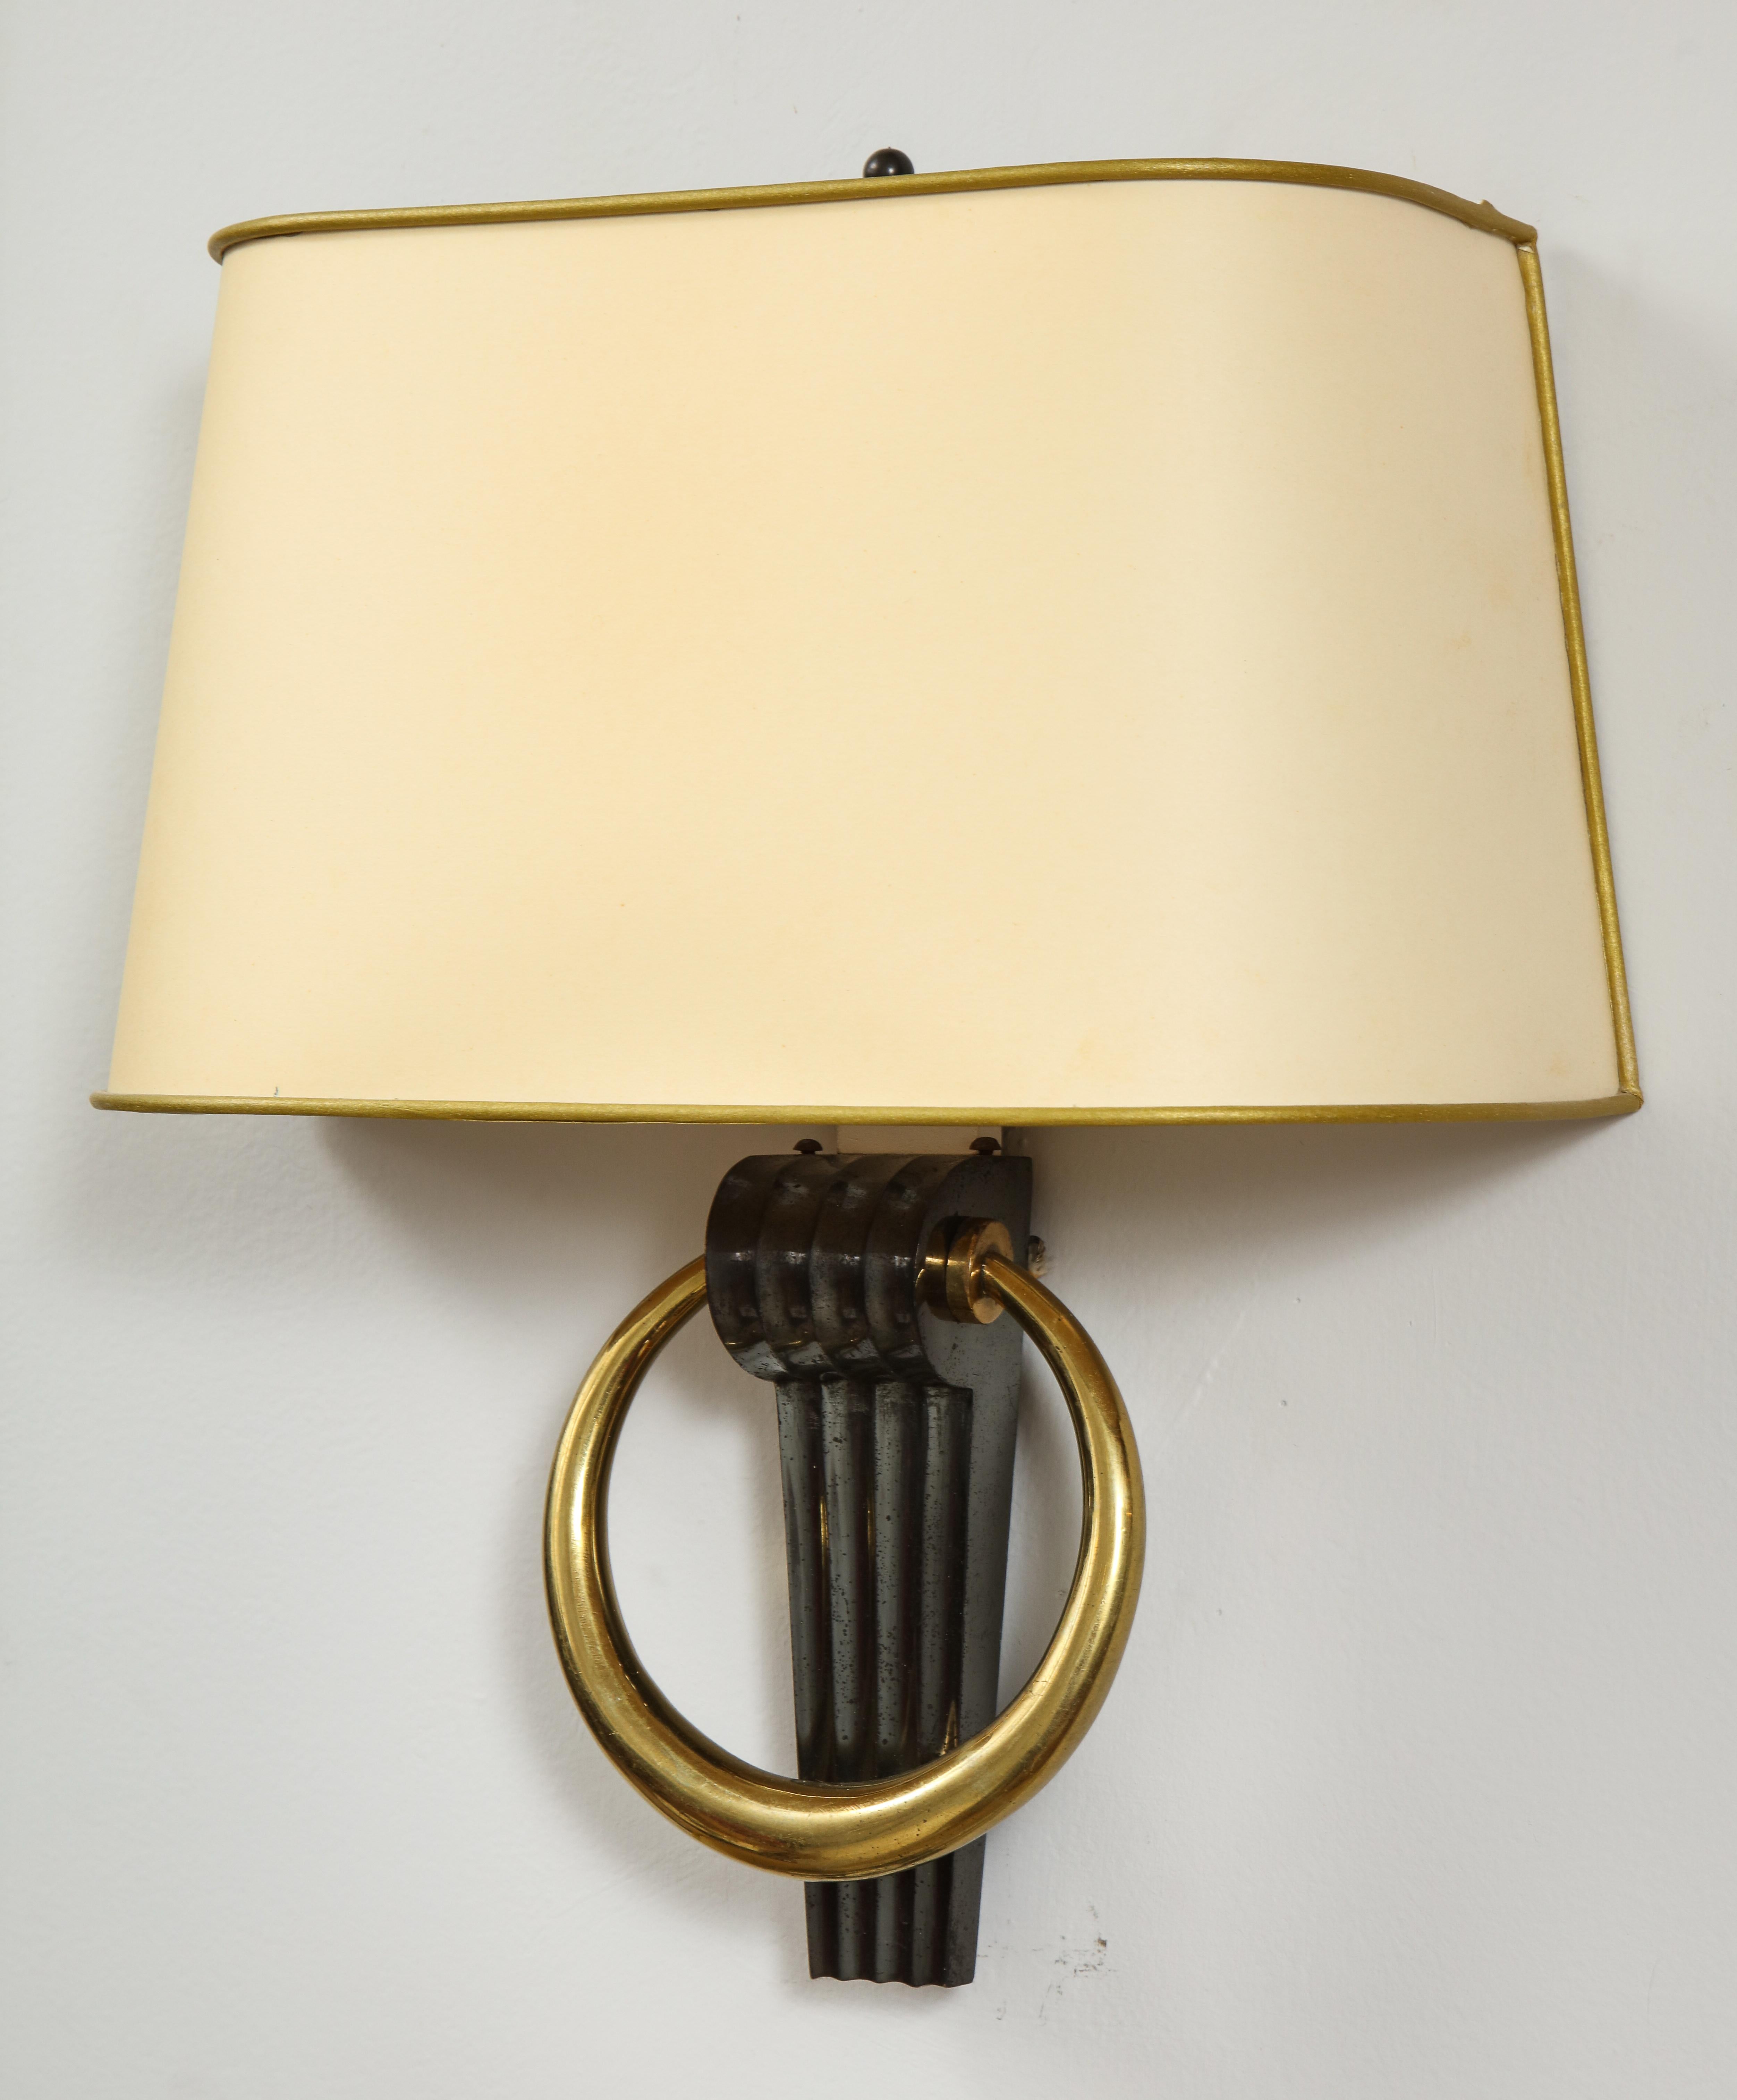 Pair of custom bronze sconces in the French 1940s manner.
Measures: H 13 in. x W 9.50 in. x D 4 in.
Lead Time is 8-10 weeks. 